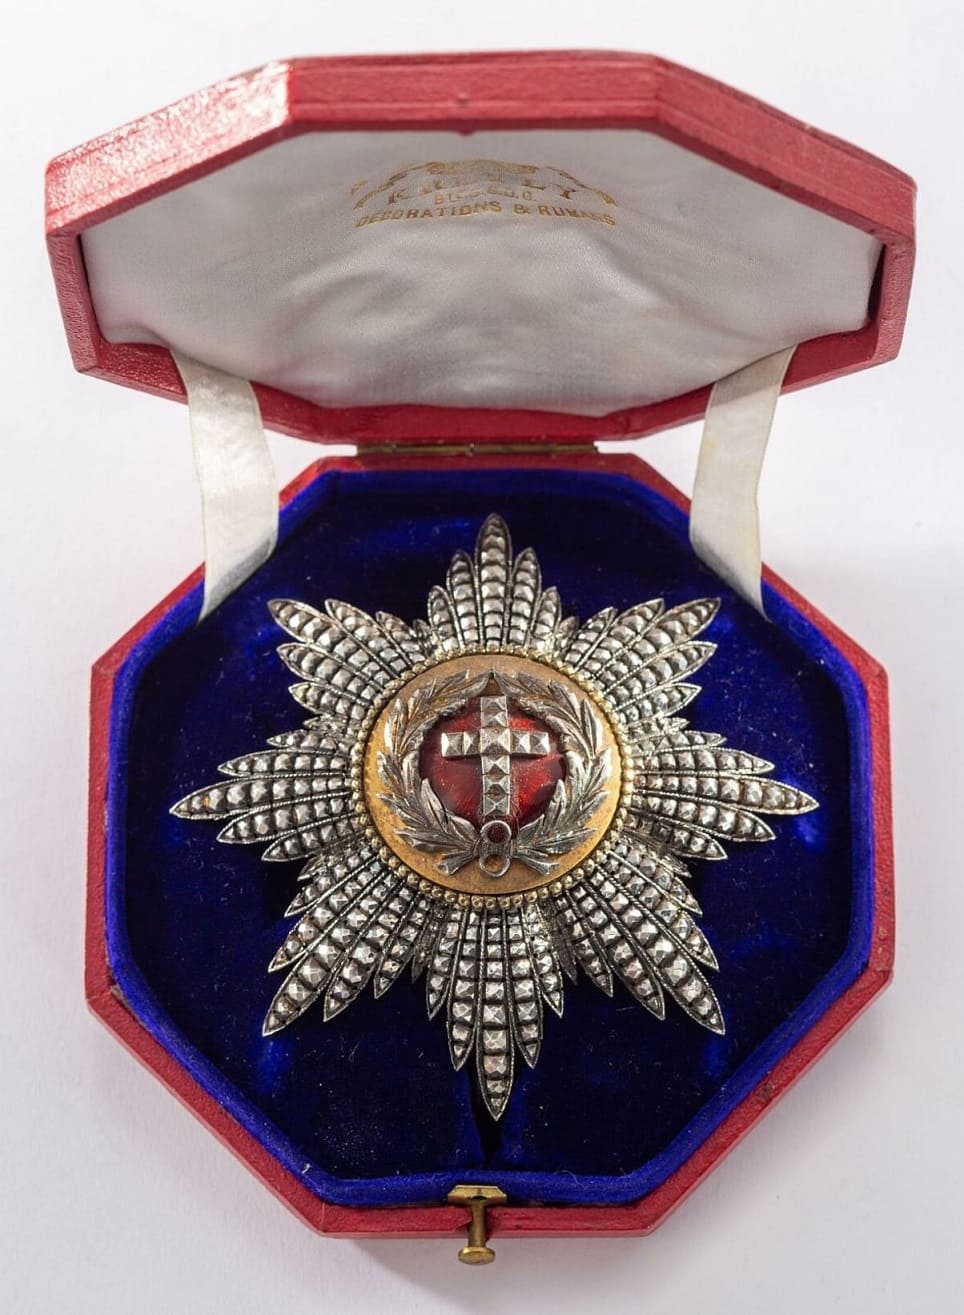 Order of the Elephant Breast Star  made by Kretly.jpg